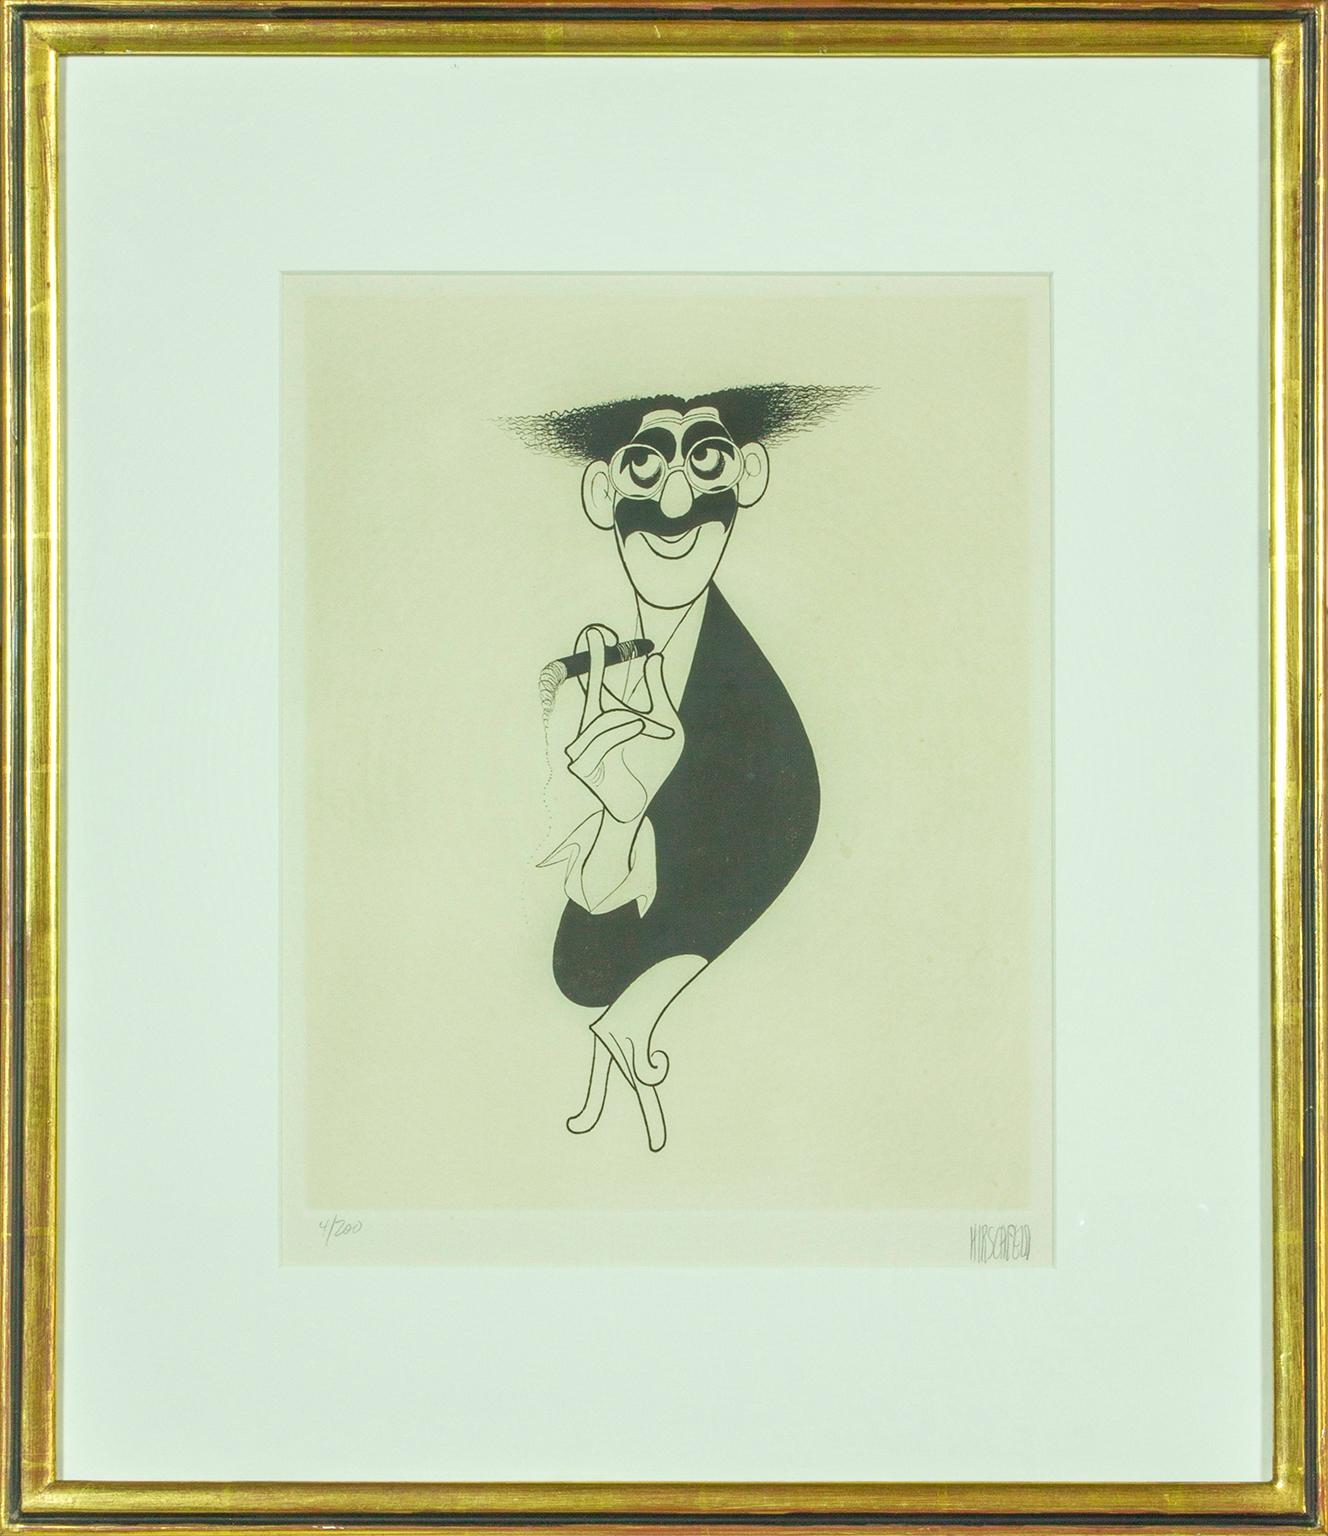 1983 "Groucho Marx" original etching by Al Hirschfeld. Hand signed and numbered.